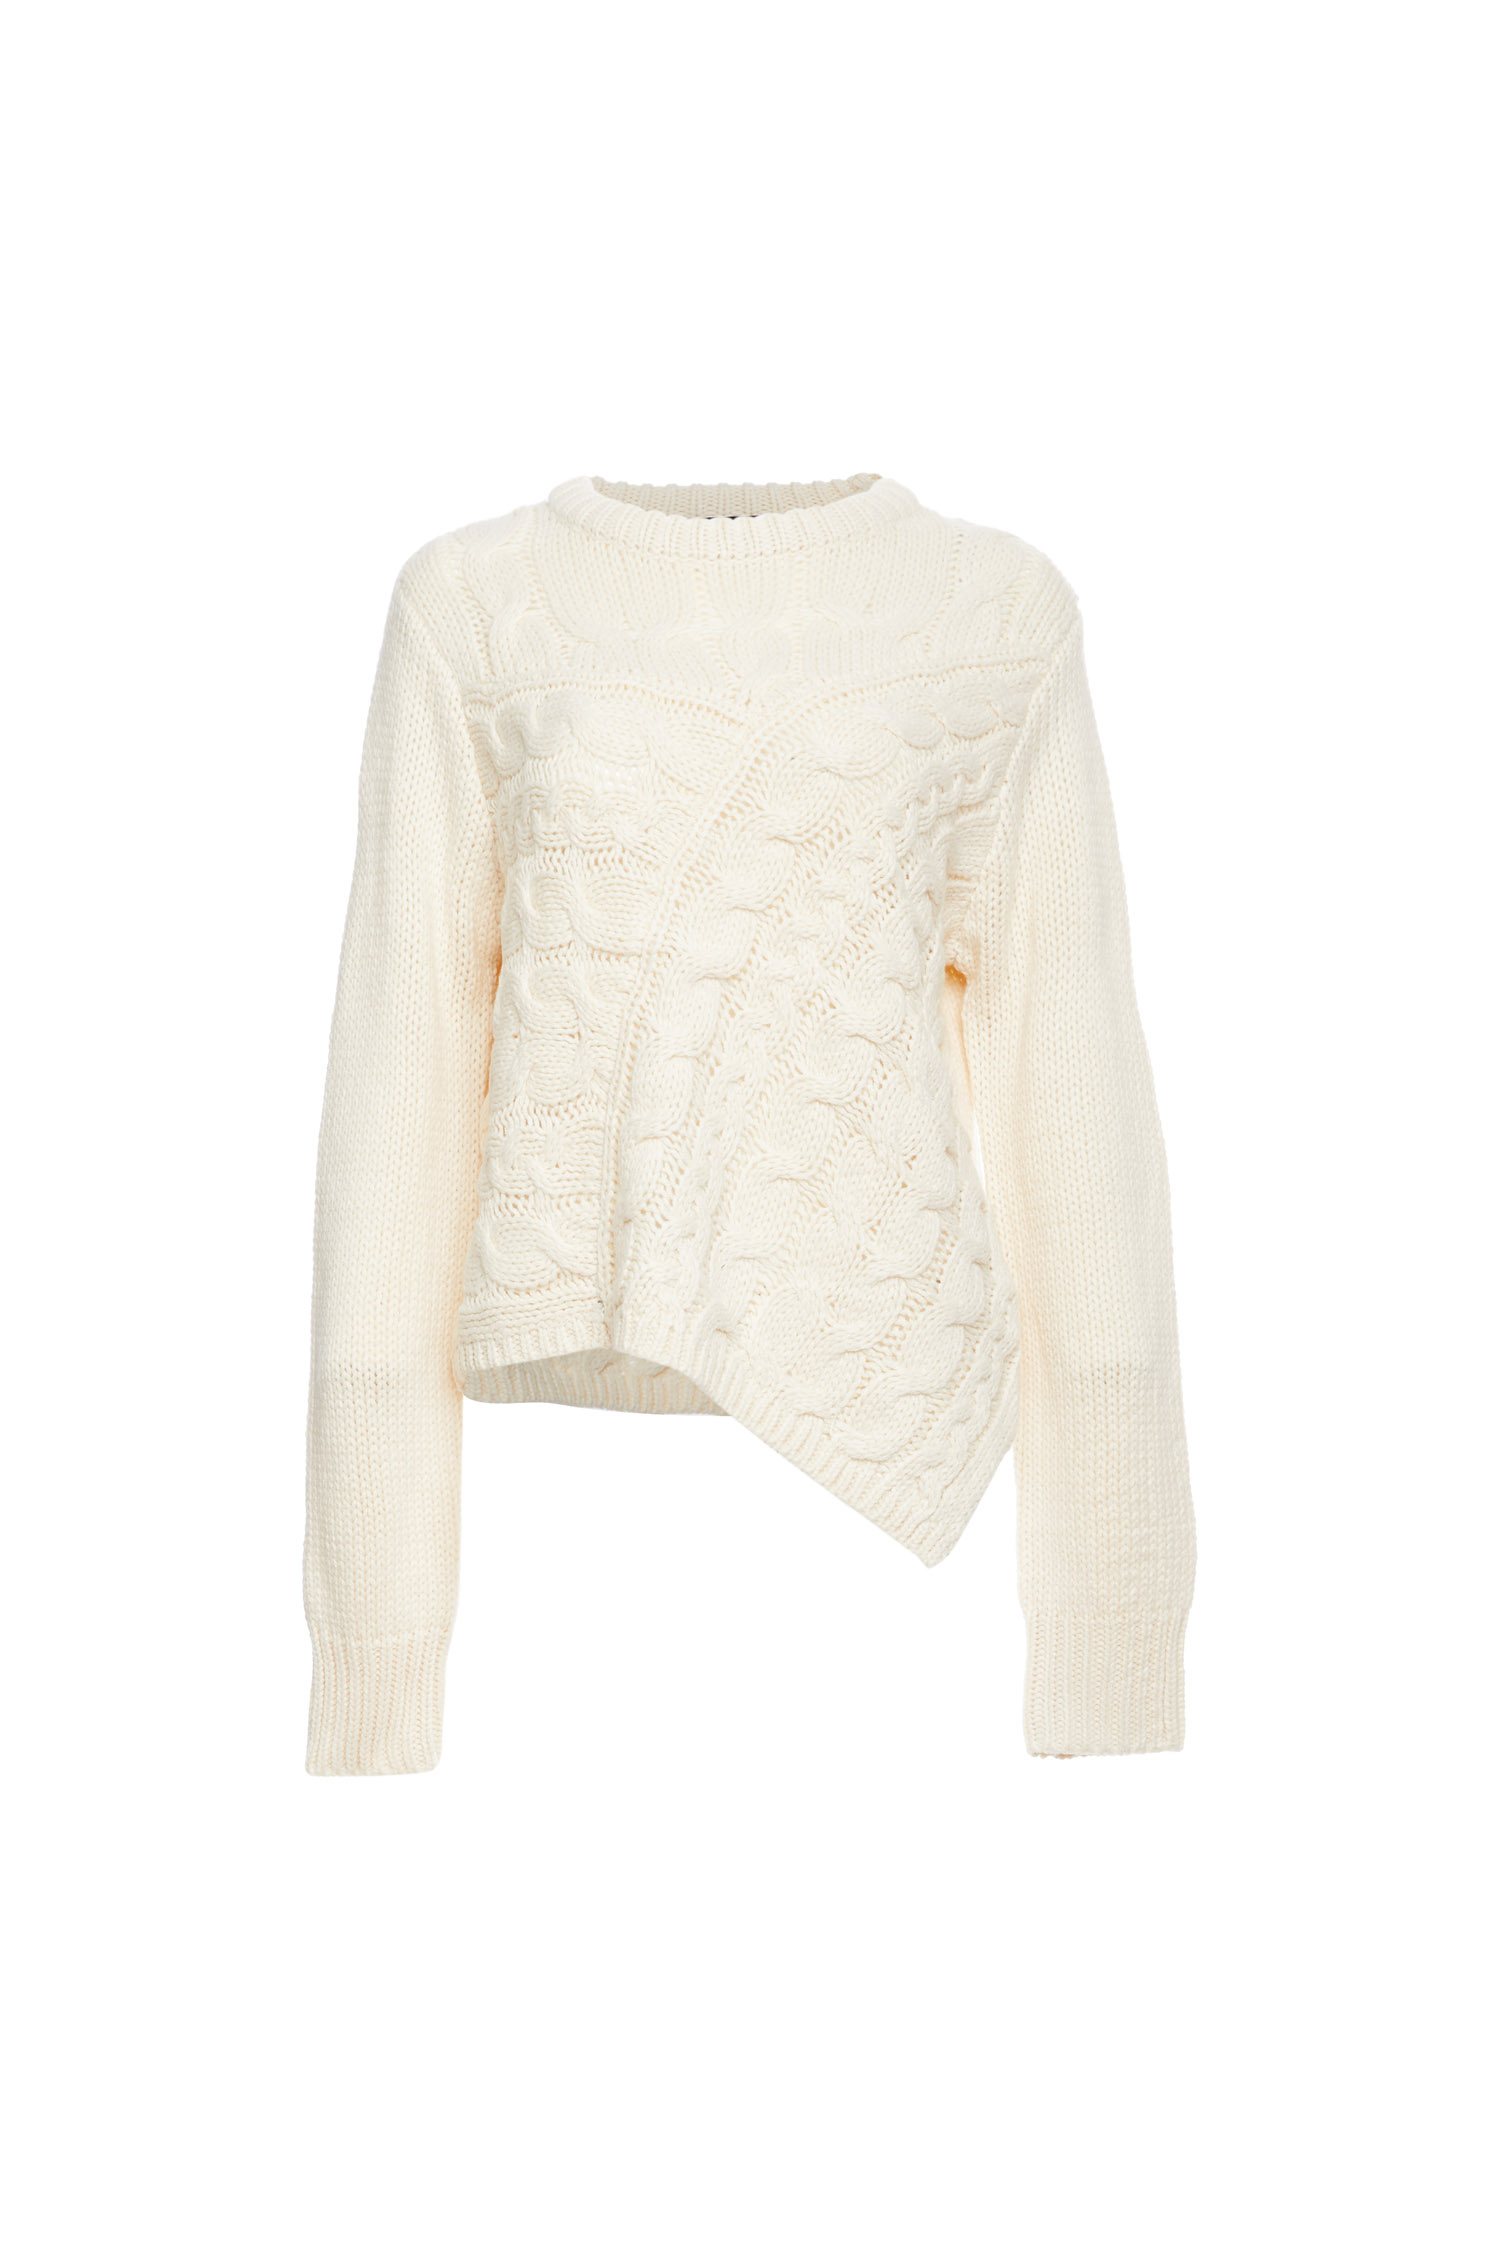 Asymmetrical Cropped Cable Knit Sweater in Cream | DAILYLOOK